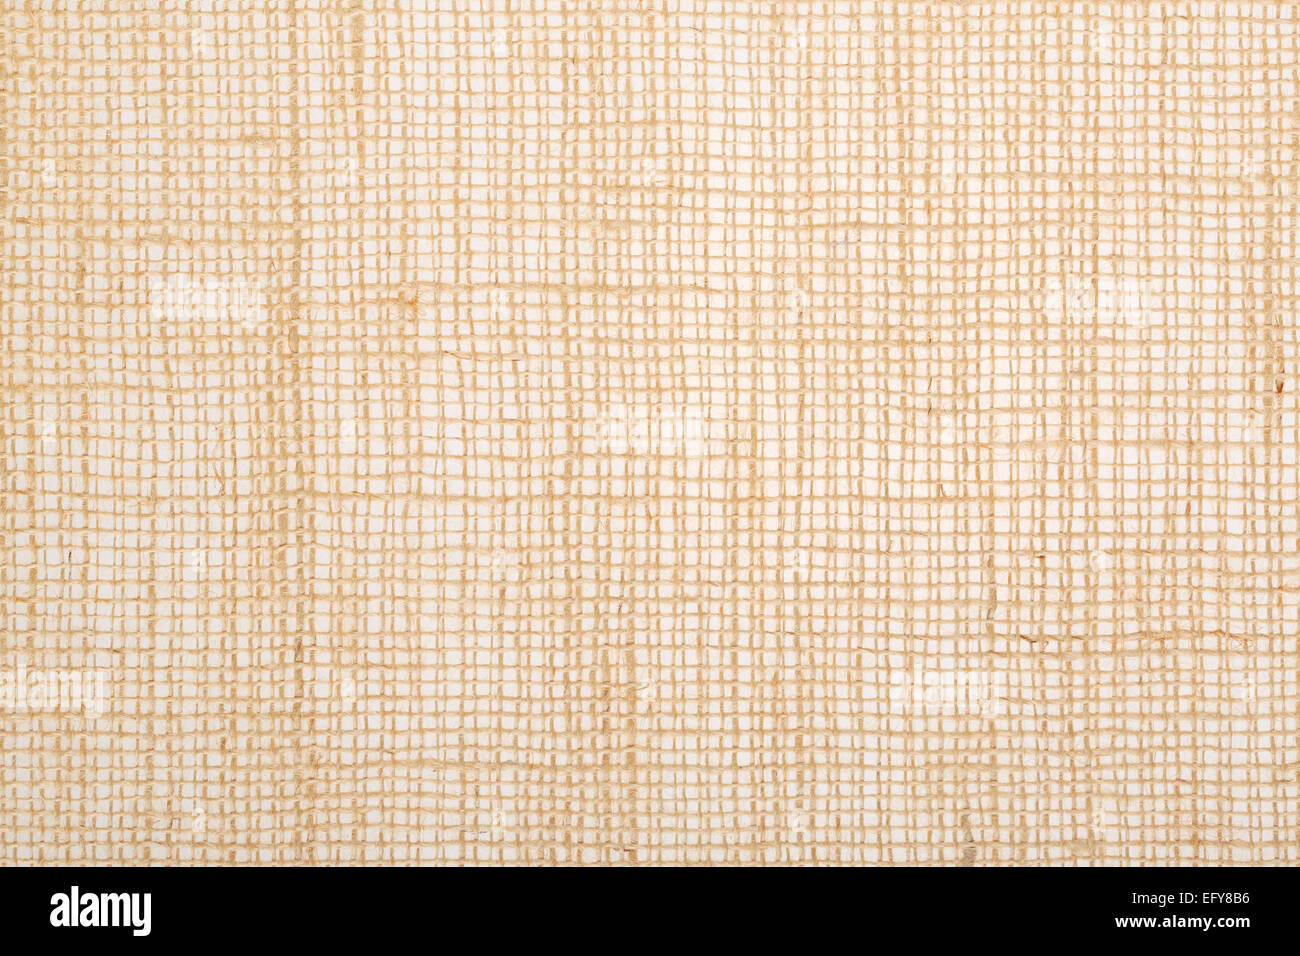 FREE) Canvas Texture